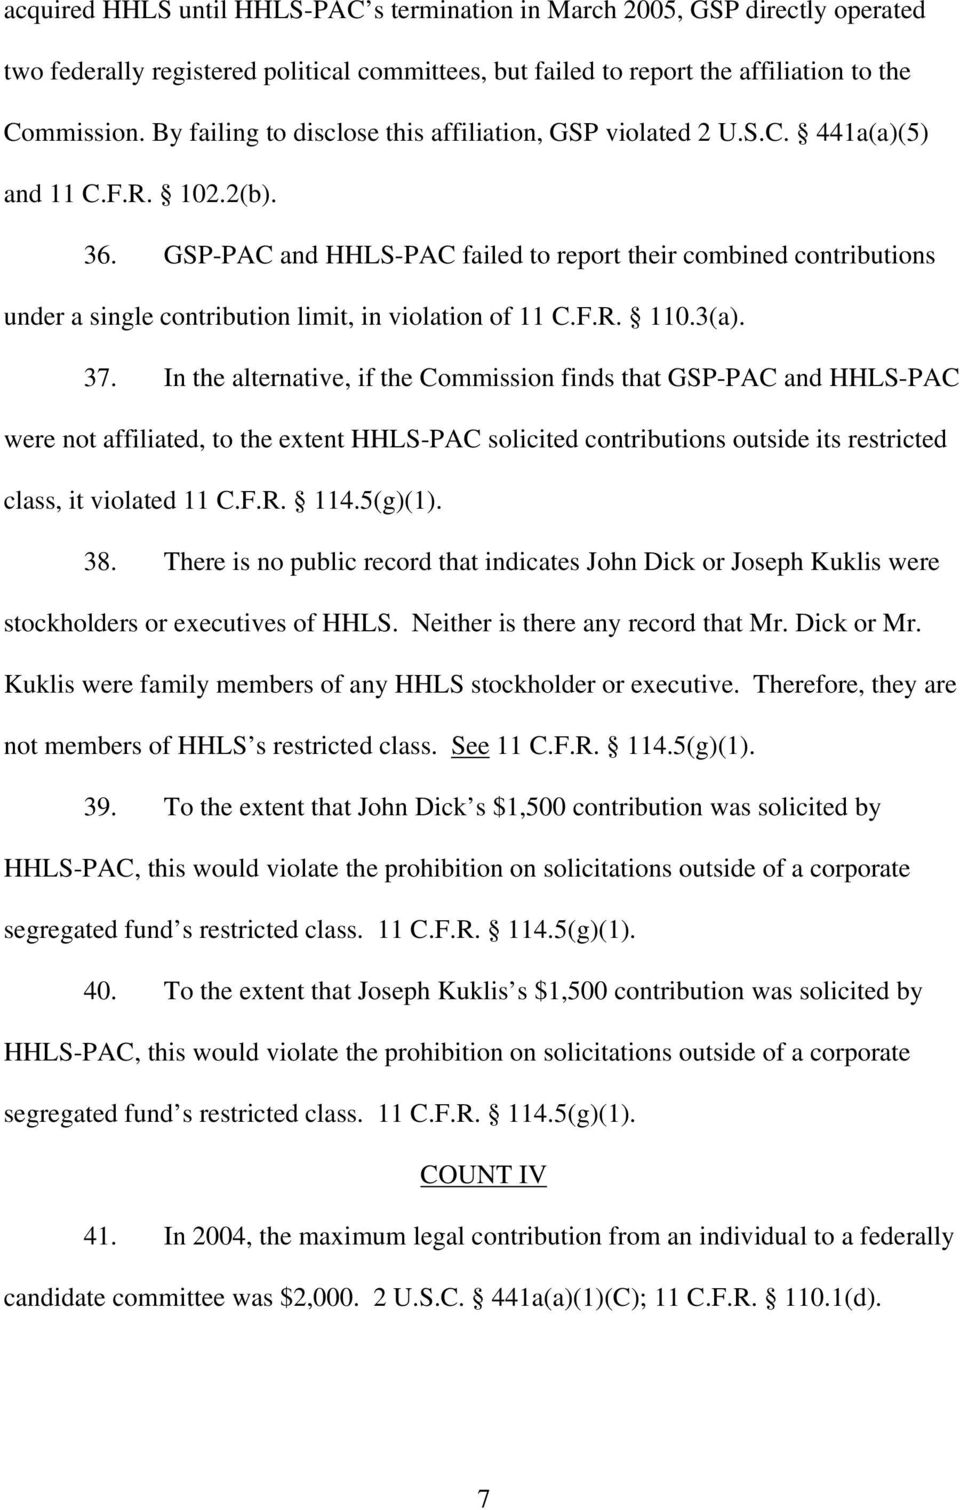 GSP-PAC and HHLS-PAC failed to report their combined contributions under a single contribution limit, in violation of 11 C.F.R. 110.3(a). 37.